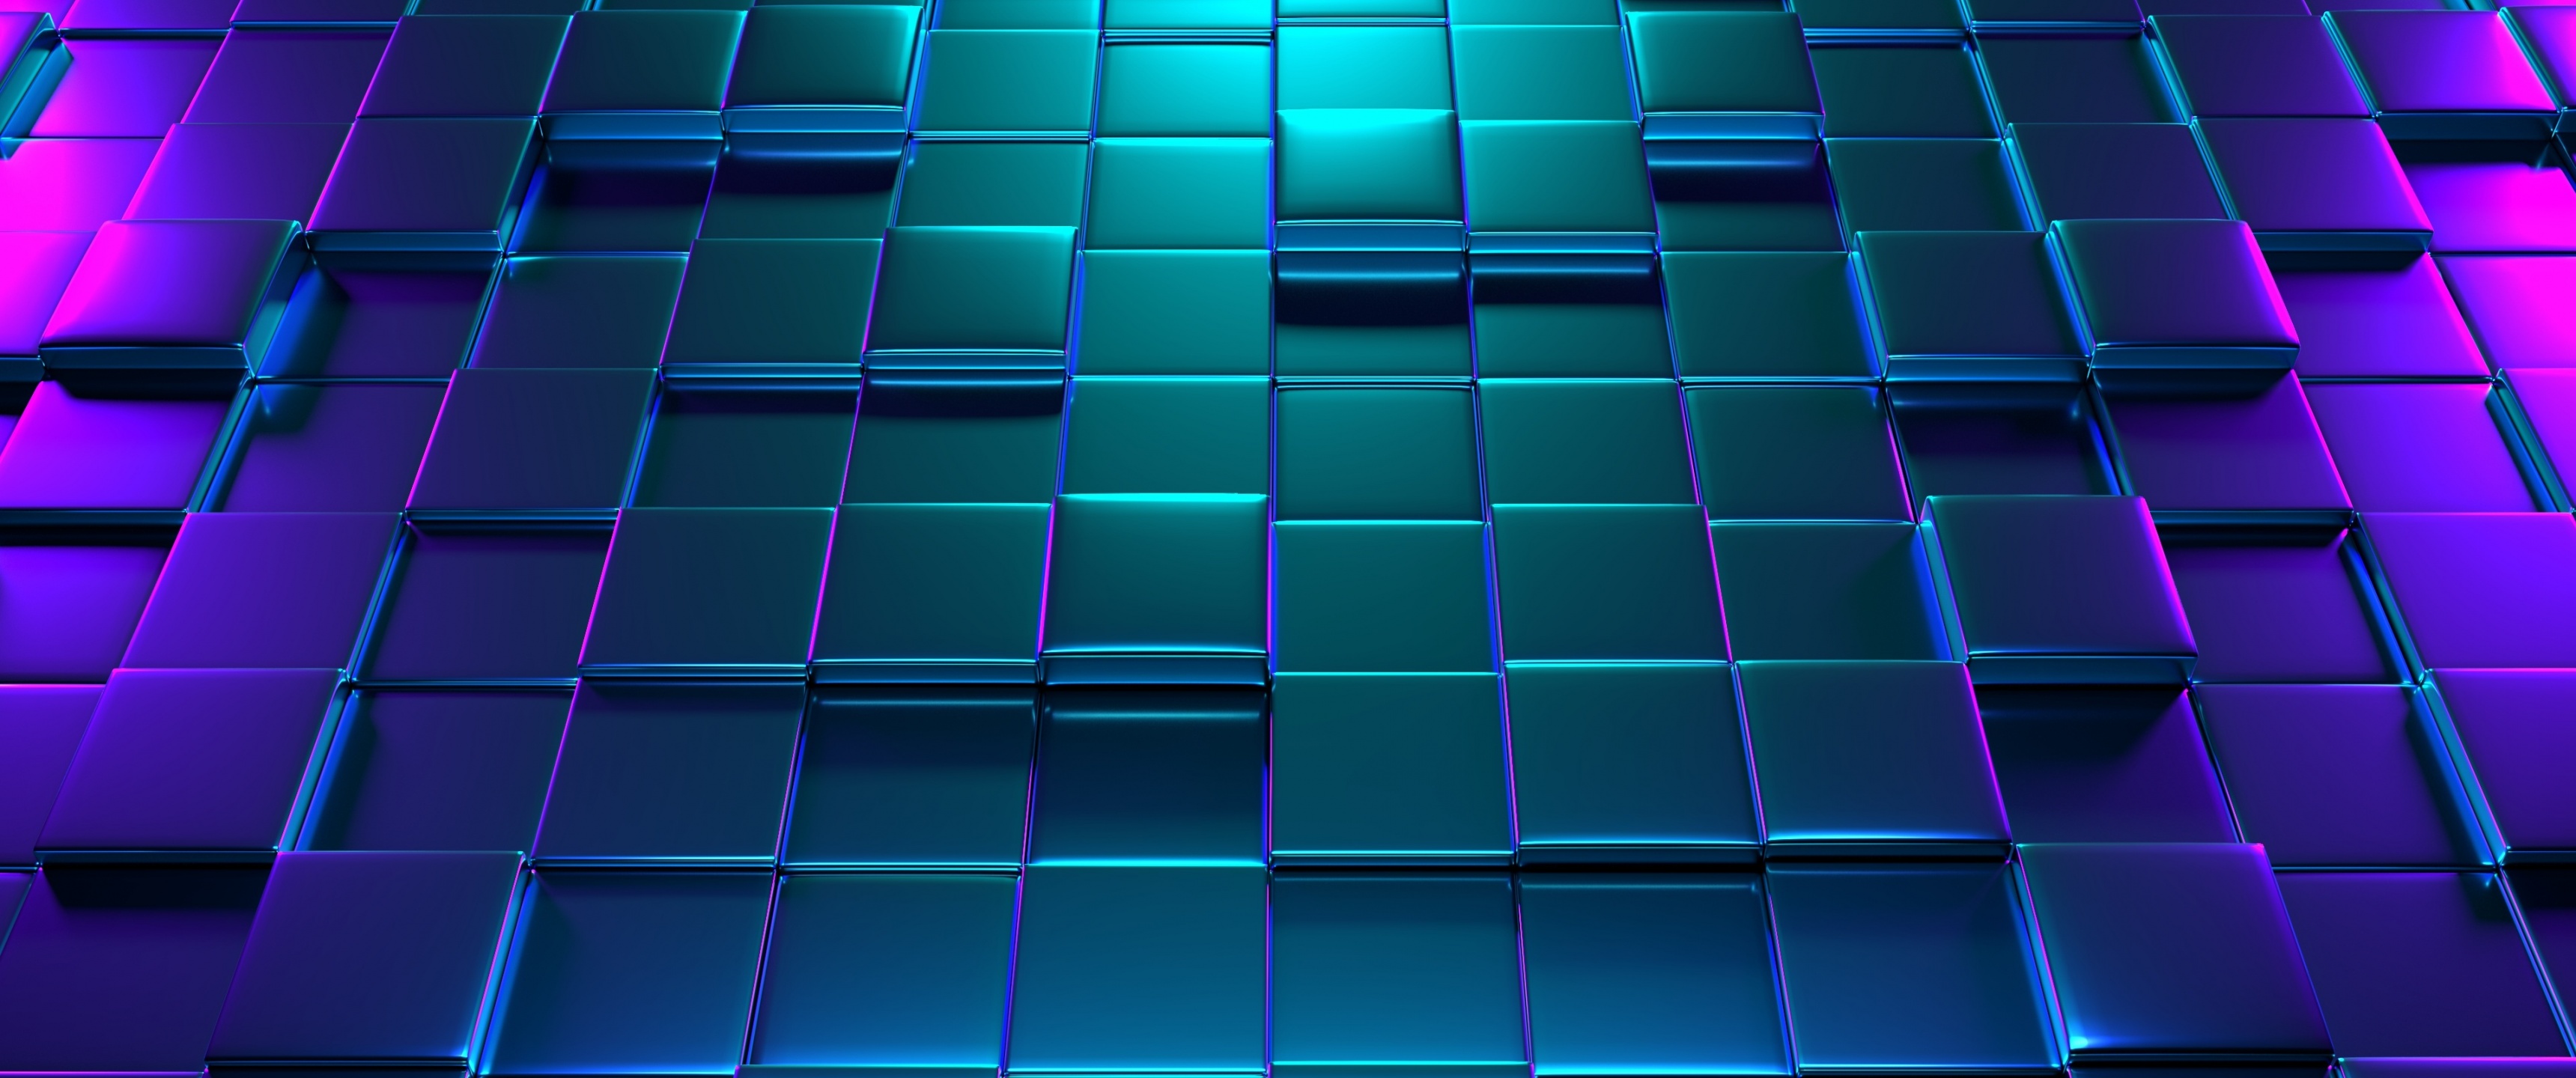 Geometric Background Photos, Download The BEST Free Geometric Background  Stock Photos & HD Images